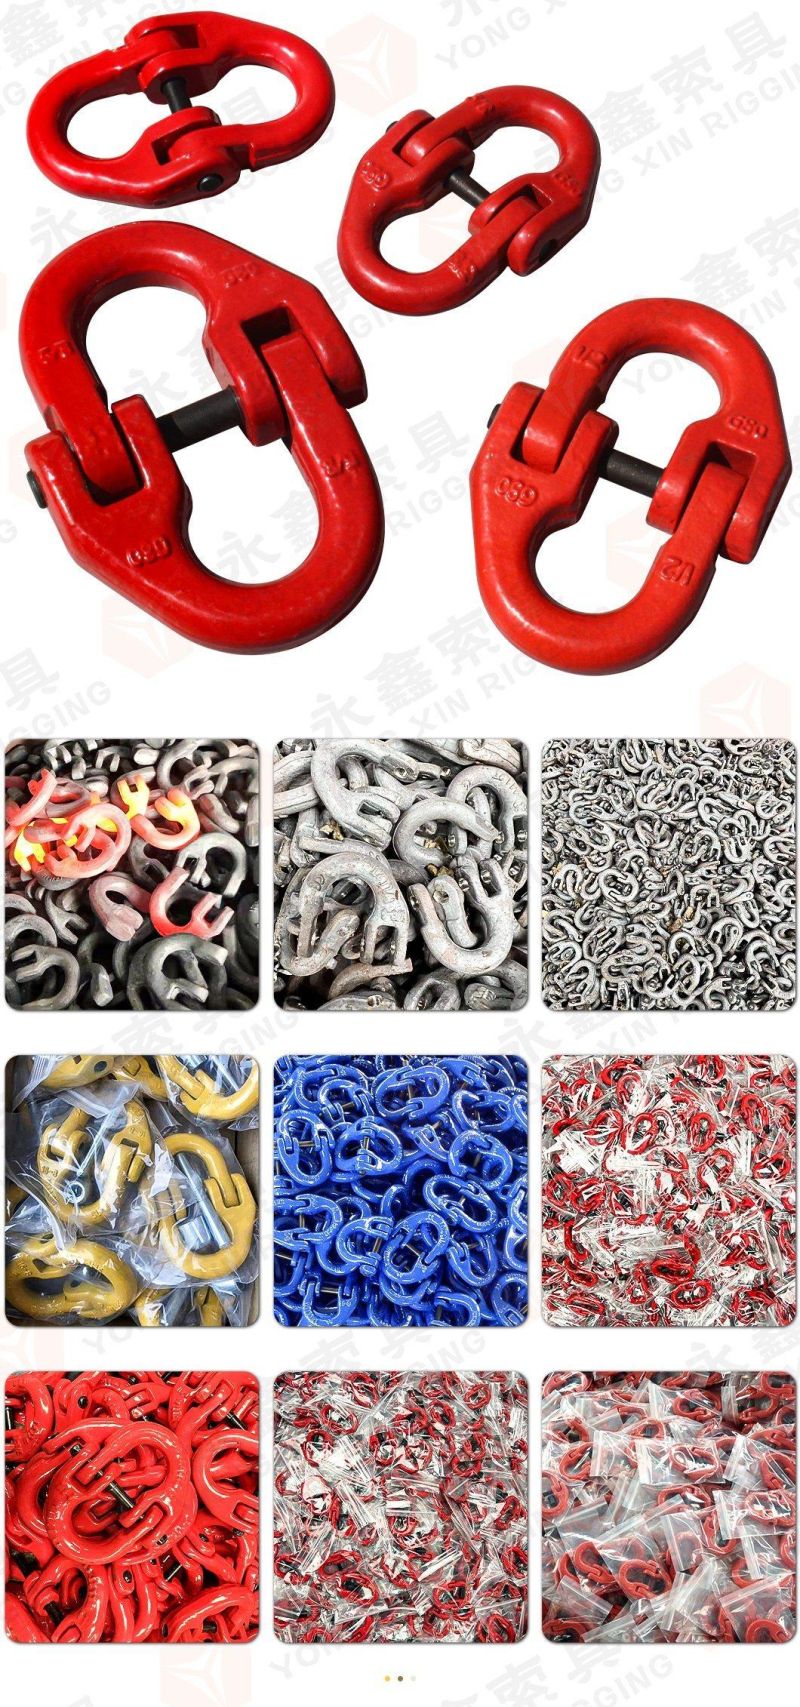 Safety G80 Hammerlock Coupling Link Heavy Duty Alloy Steel Connecting Link 1/2 Inch Tow Hitch Hammer Lock Chain Connector